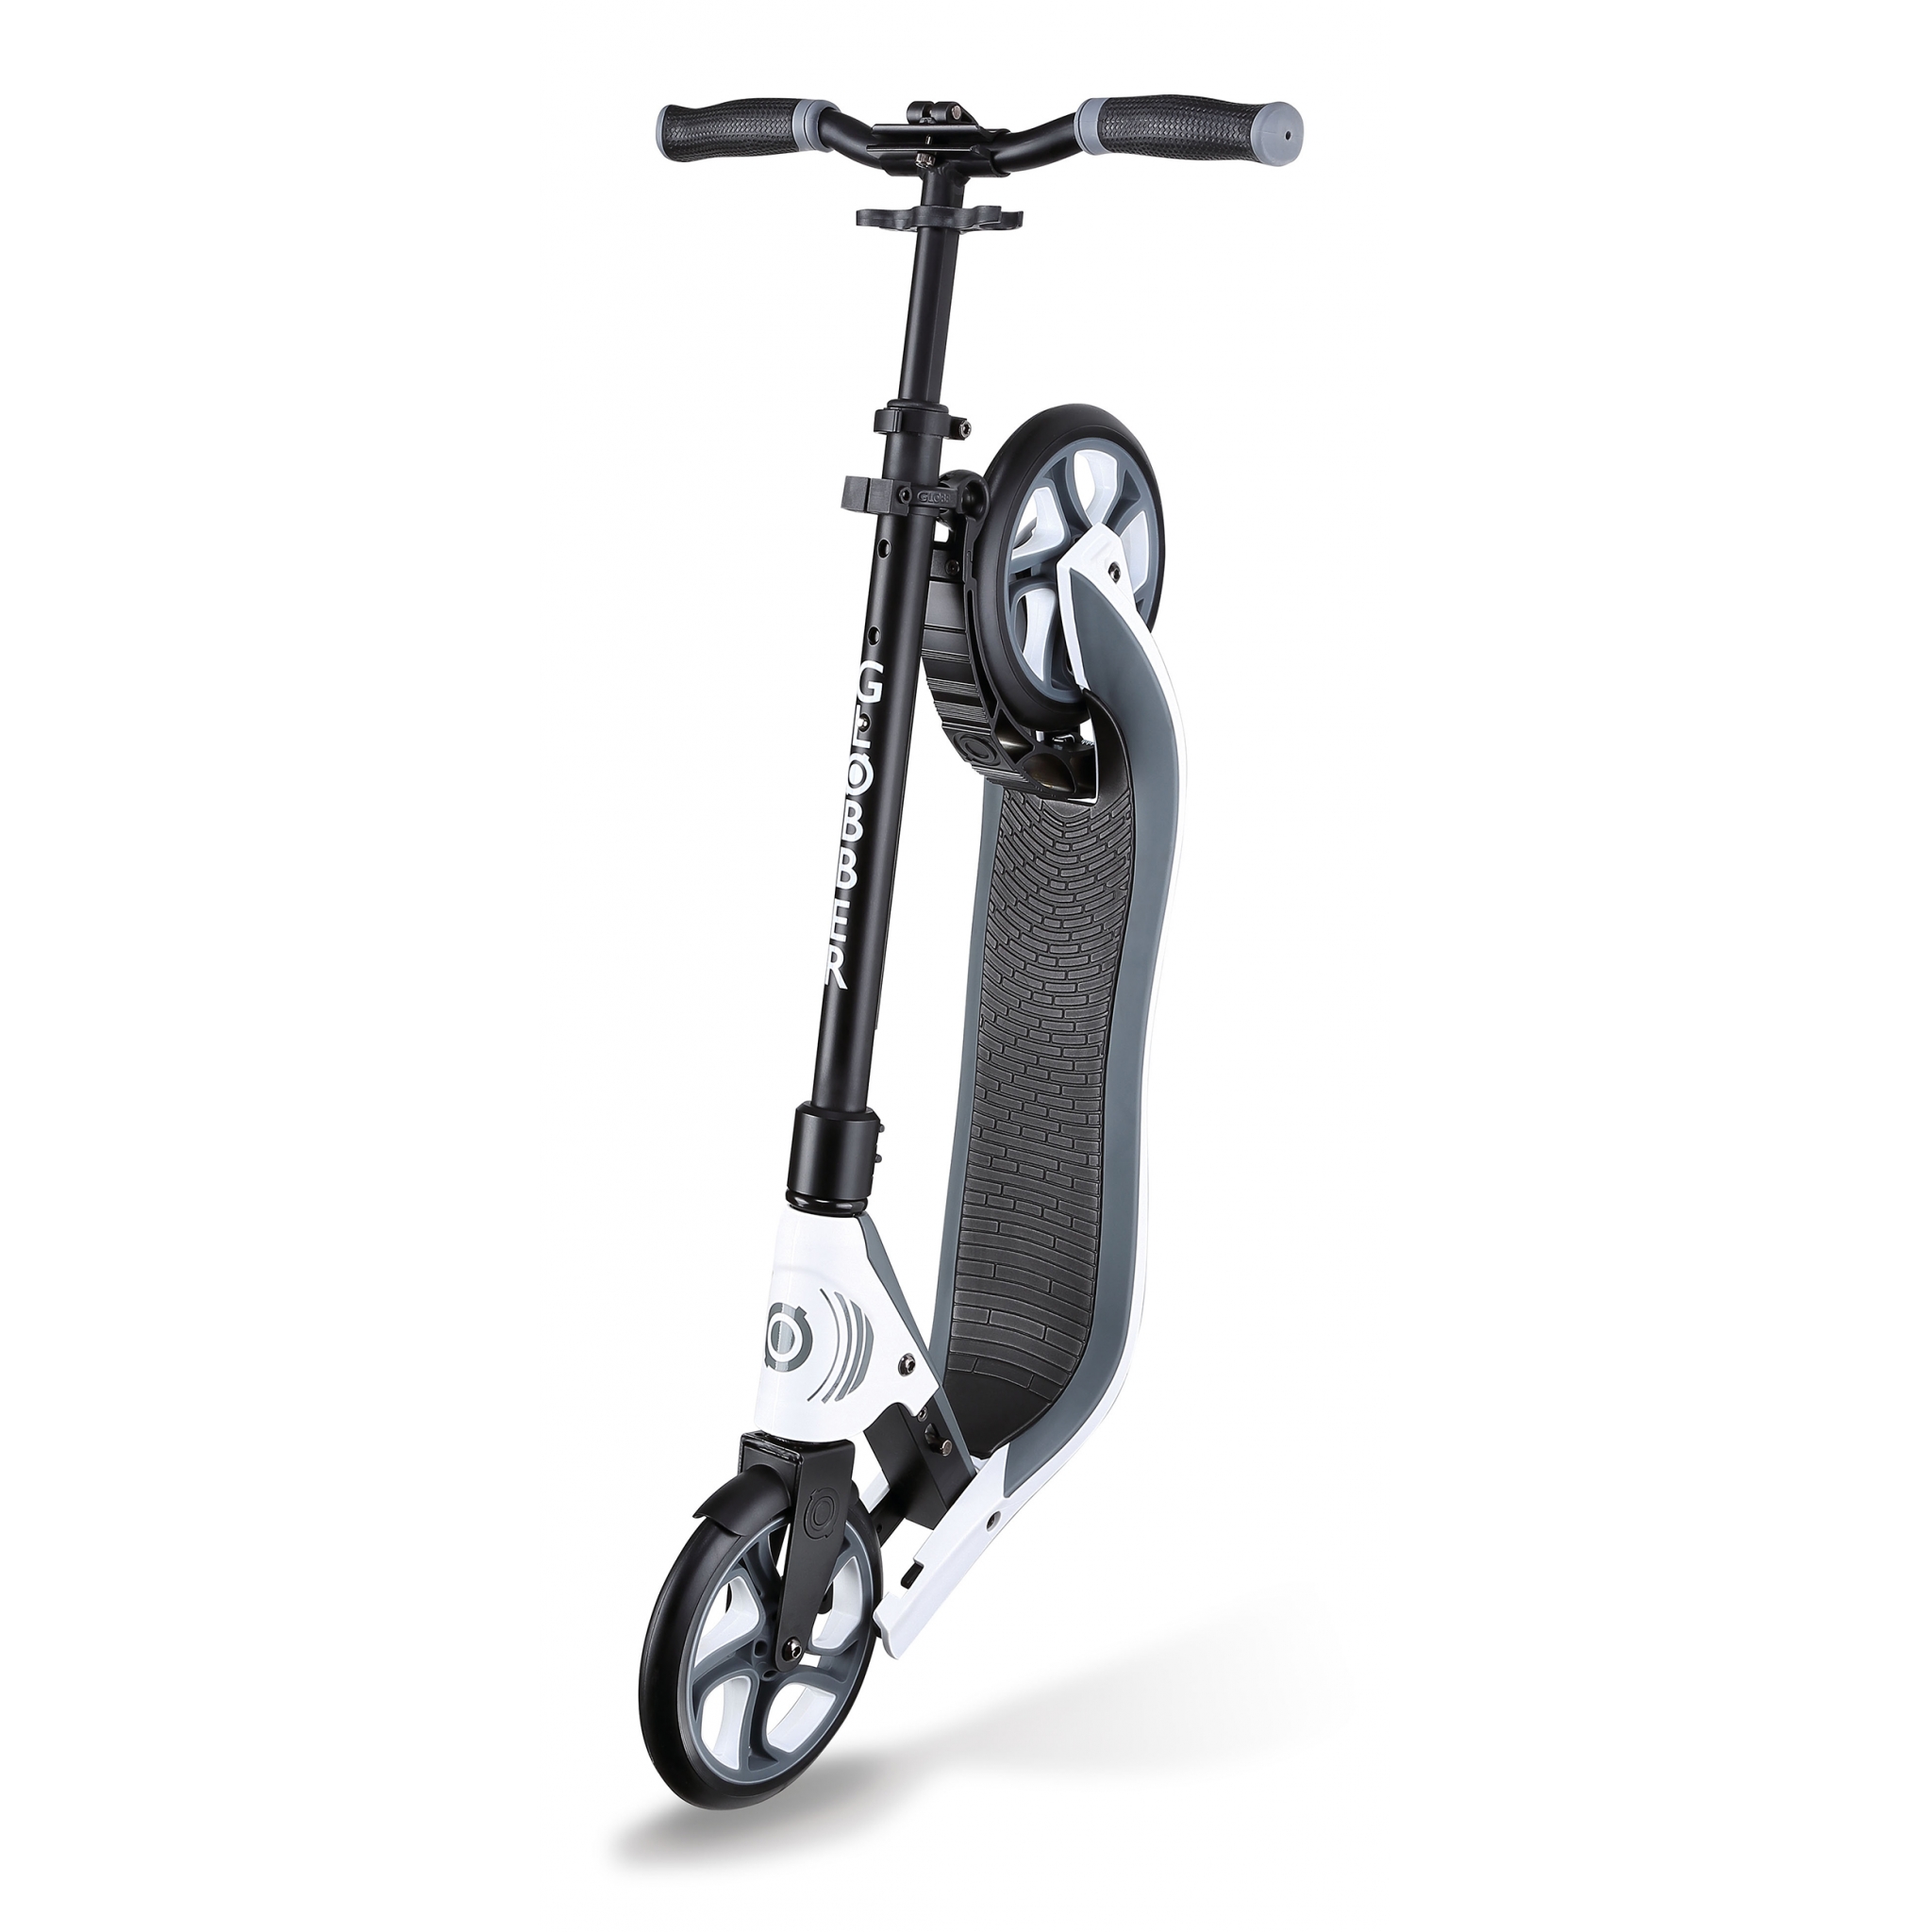 2-wheel foldable scooter for adults - Globber ONE NL 205 1